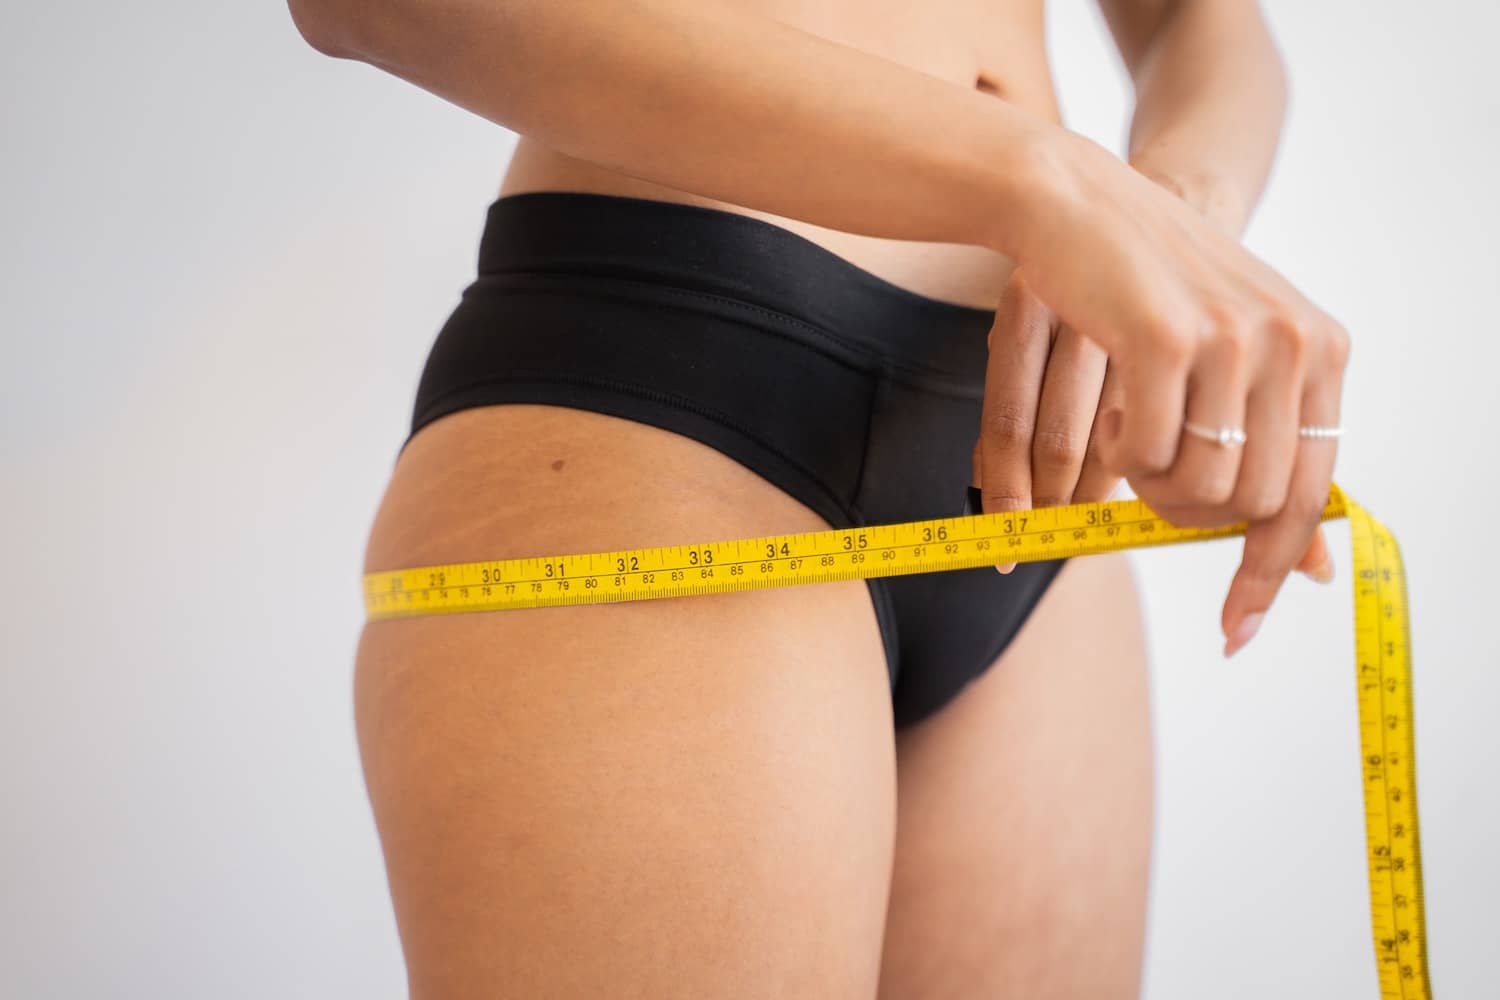 Liposuction Recovery: 15 Tips to Enhance Your Recovery